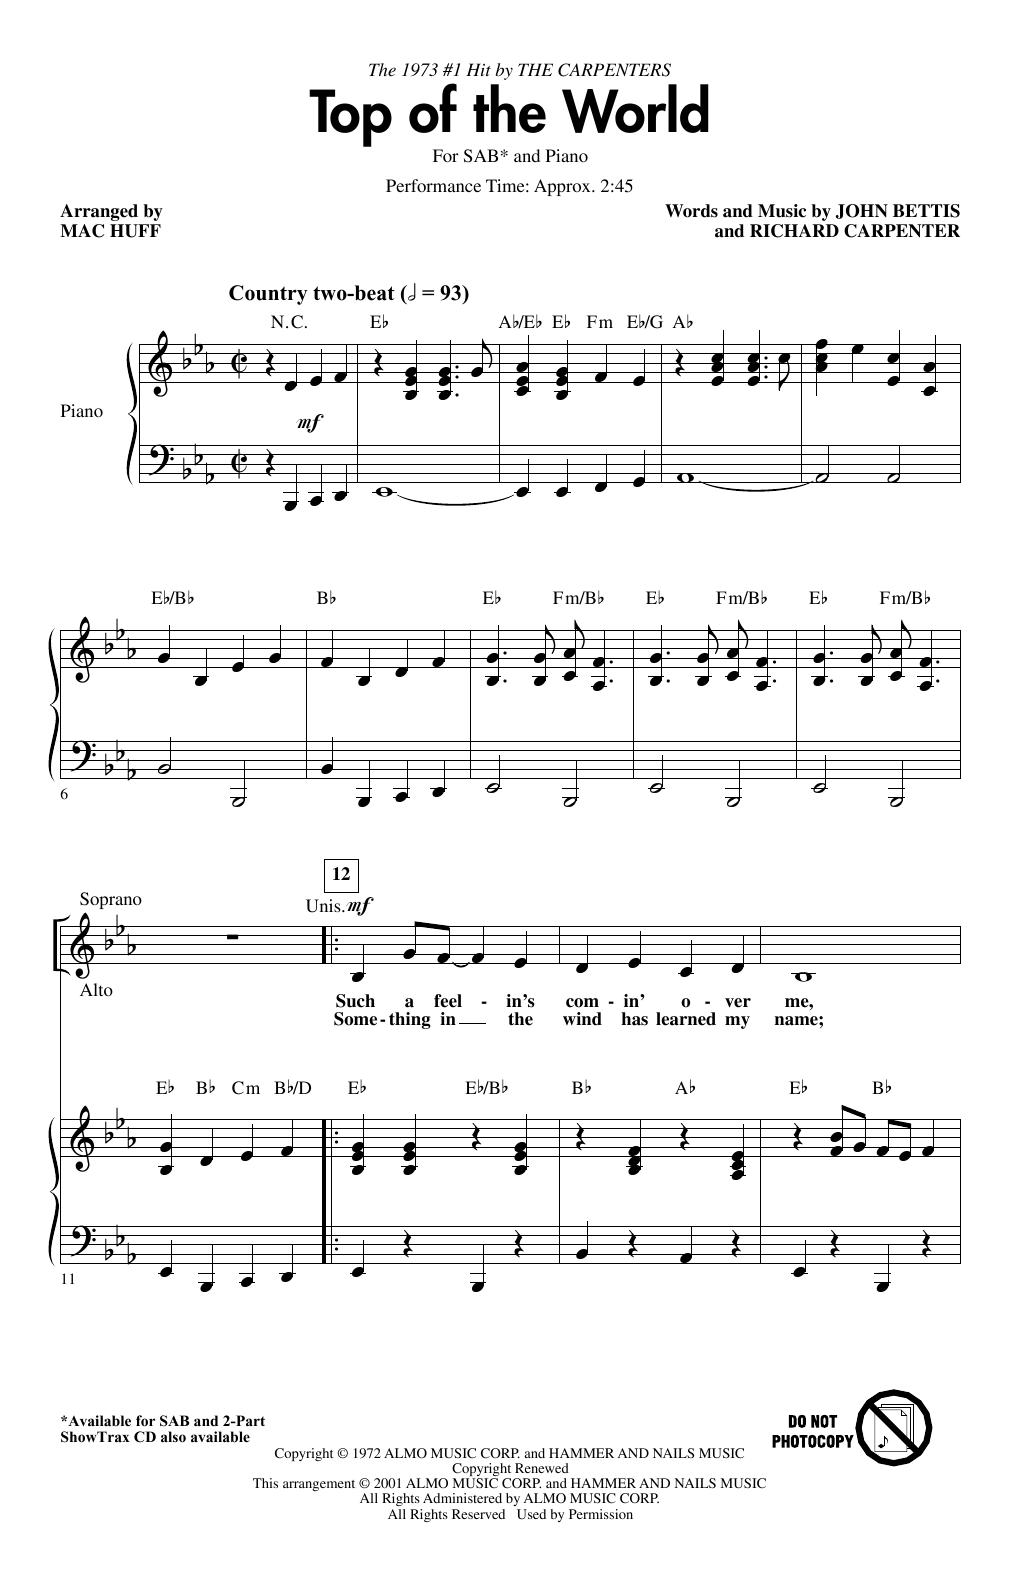 Download Carpenters Top Of The World (arr. Mac Huff) Sheet Music